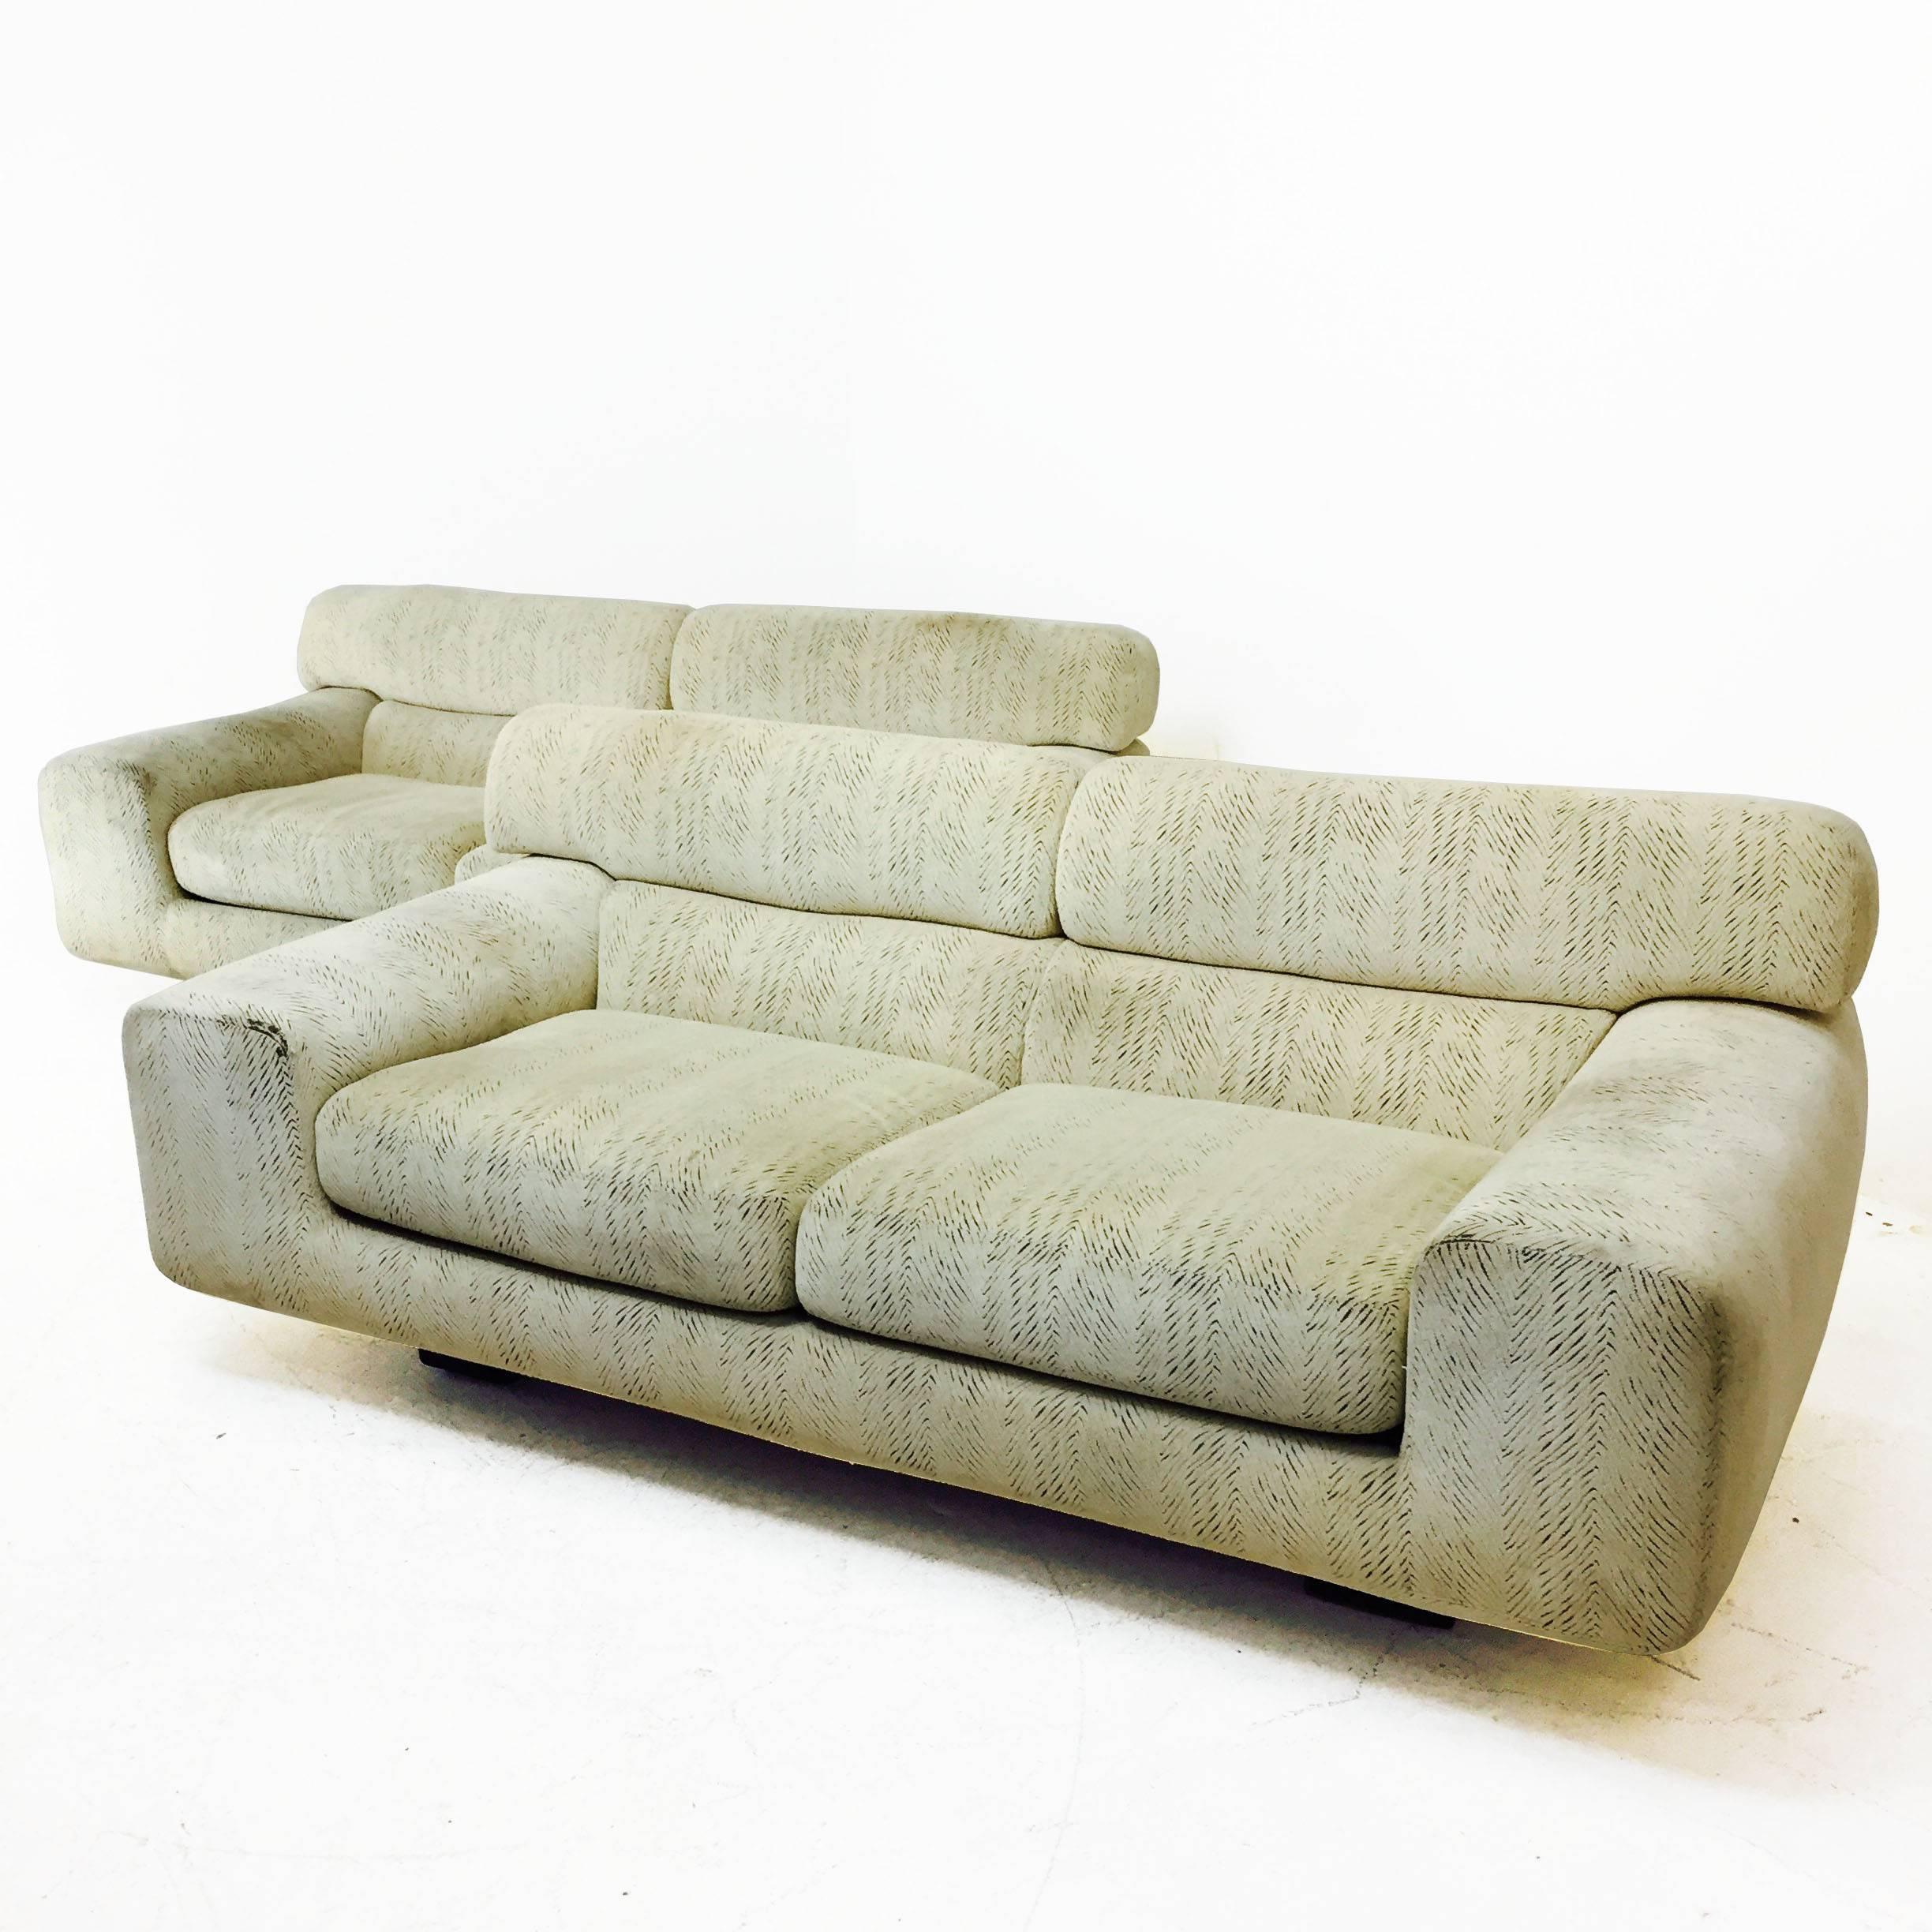 Modern loveseat in the style of Vladimir Kagan. The upholstery is in good vintage condition with some wear and soiling around arm section. 

(only one love seats available)

Love seats sold individually.

Dimensions: 70" W x 35" D x